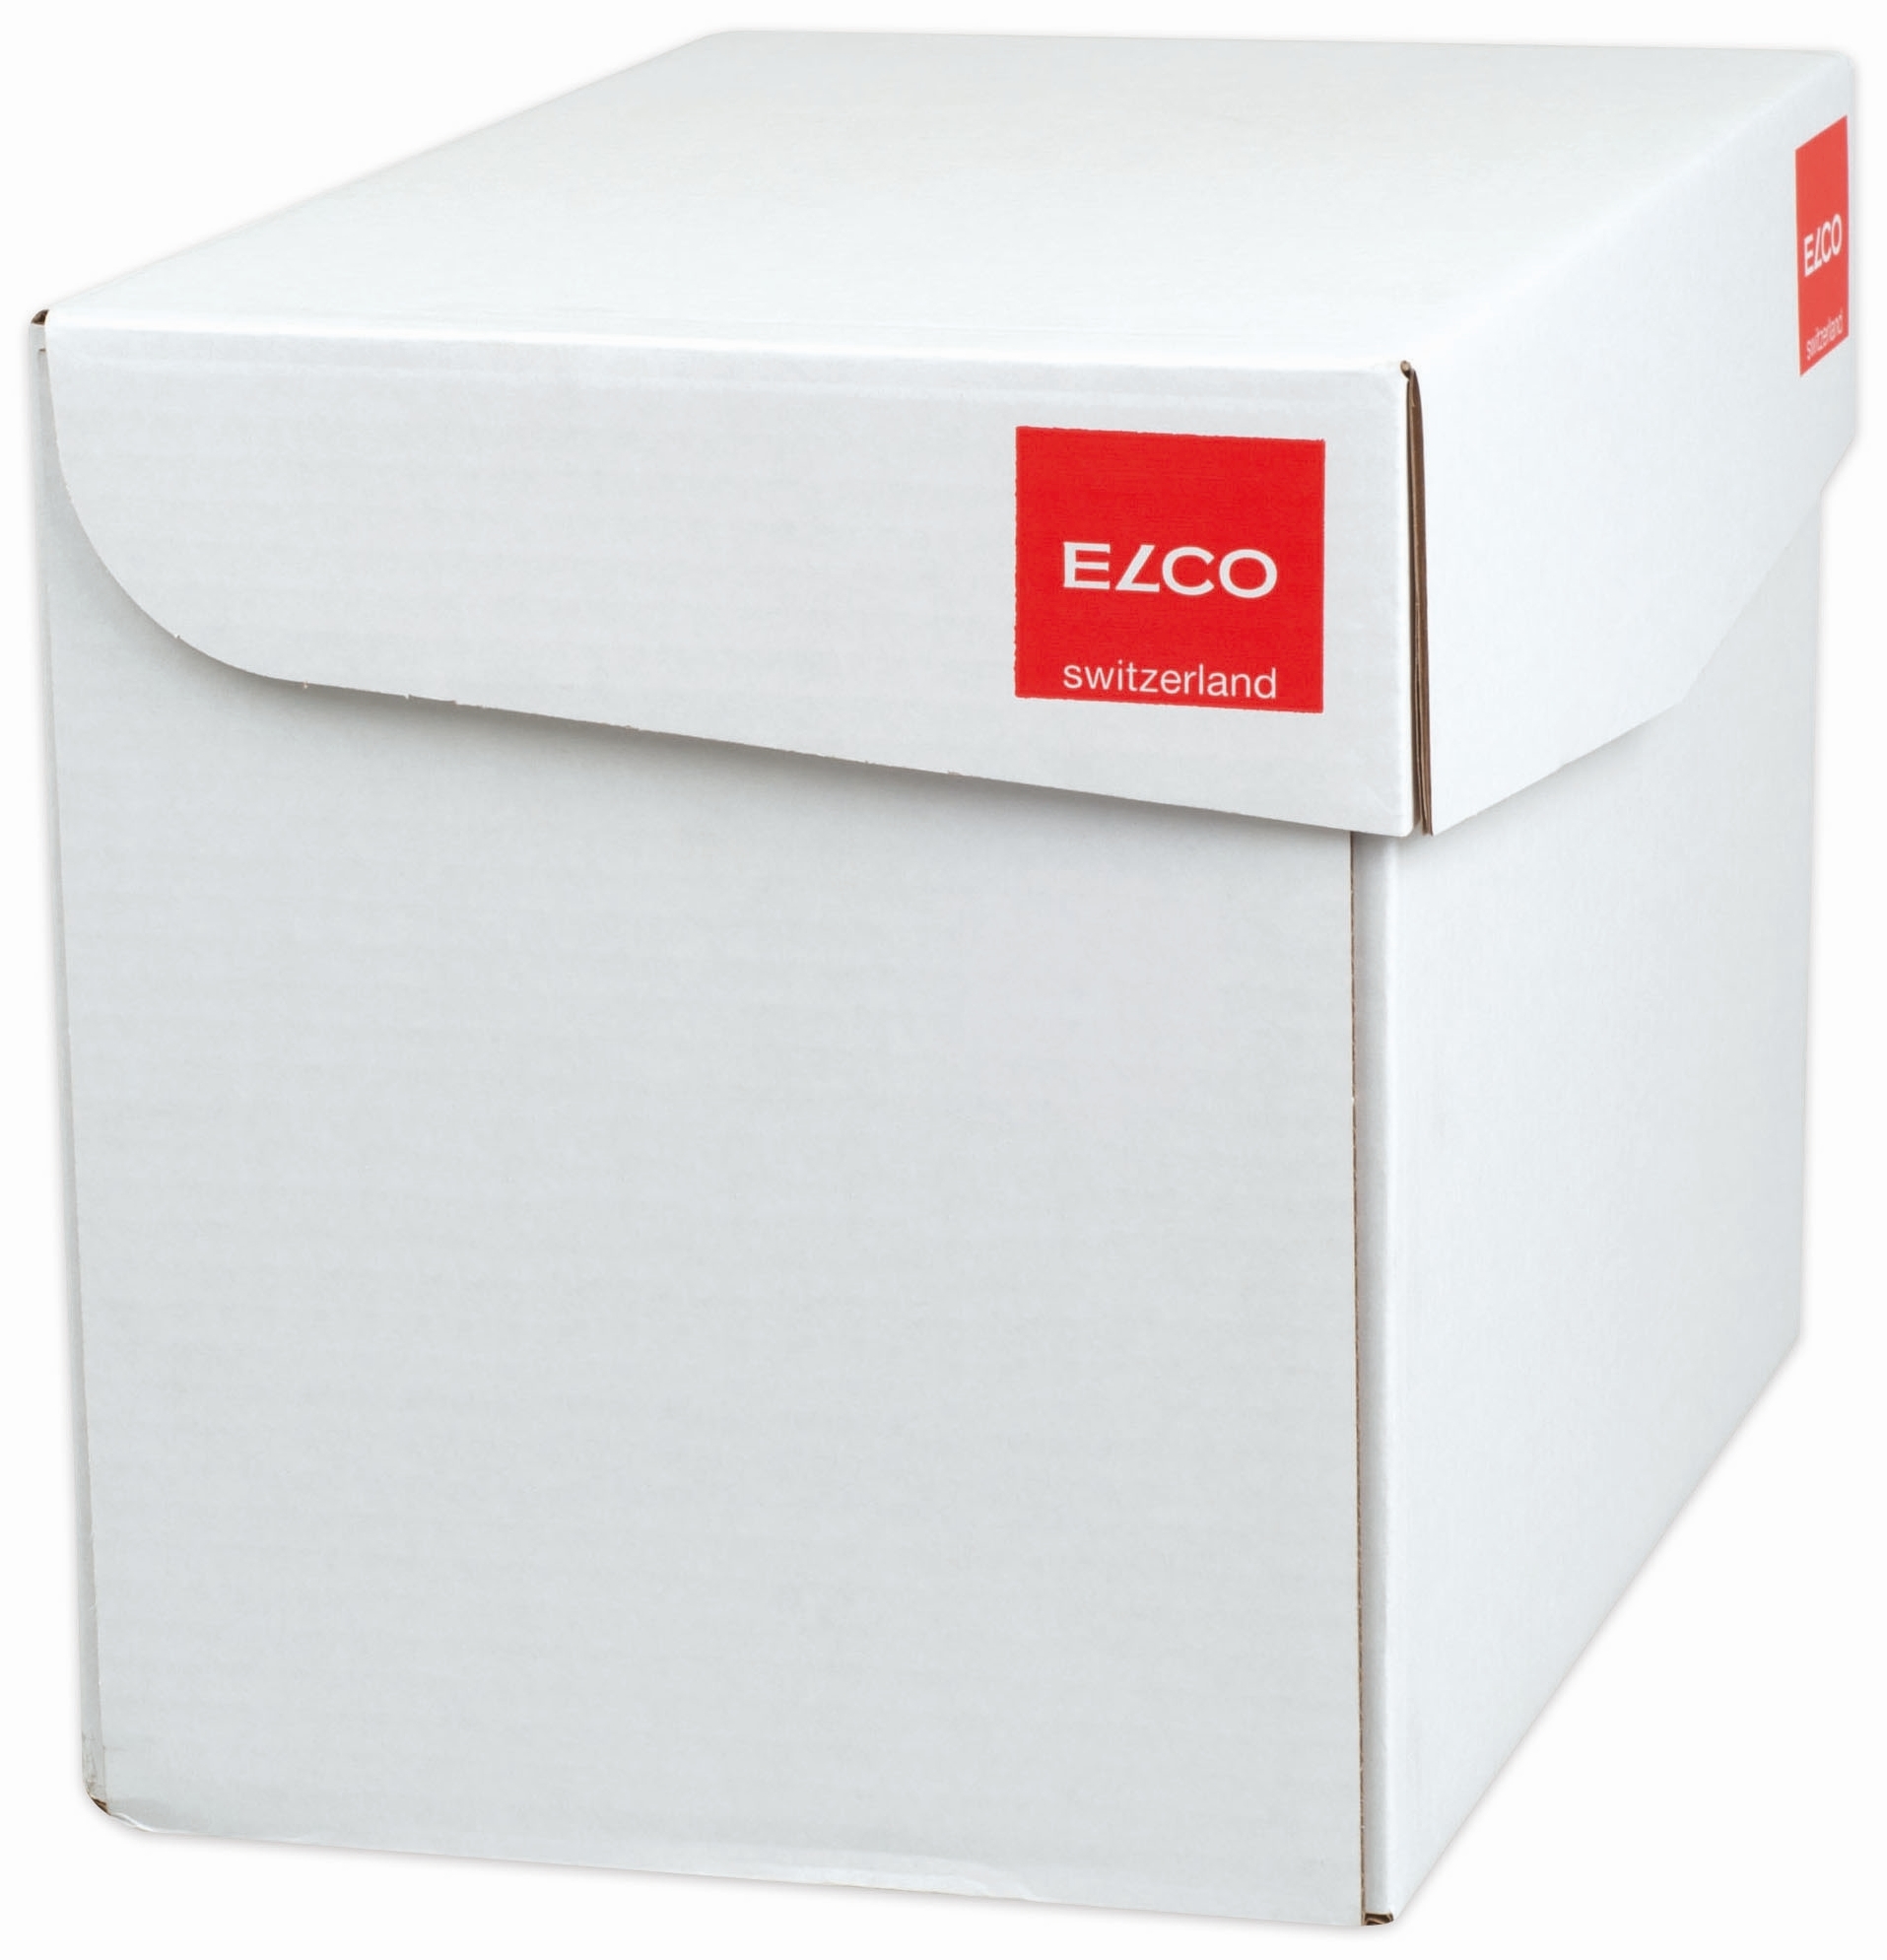 ELCO Couvert Security 330x250mm 33782 opaque 120g 100 Stk.